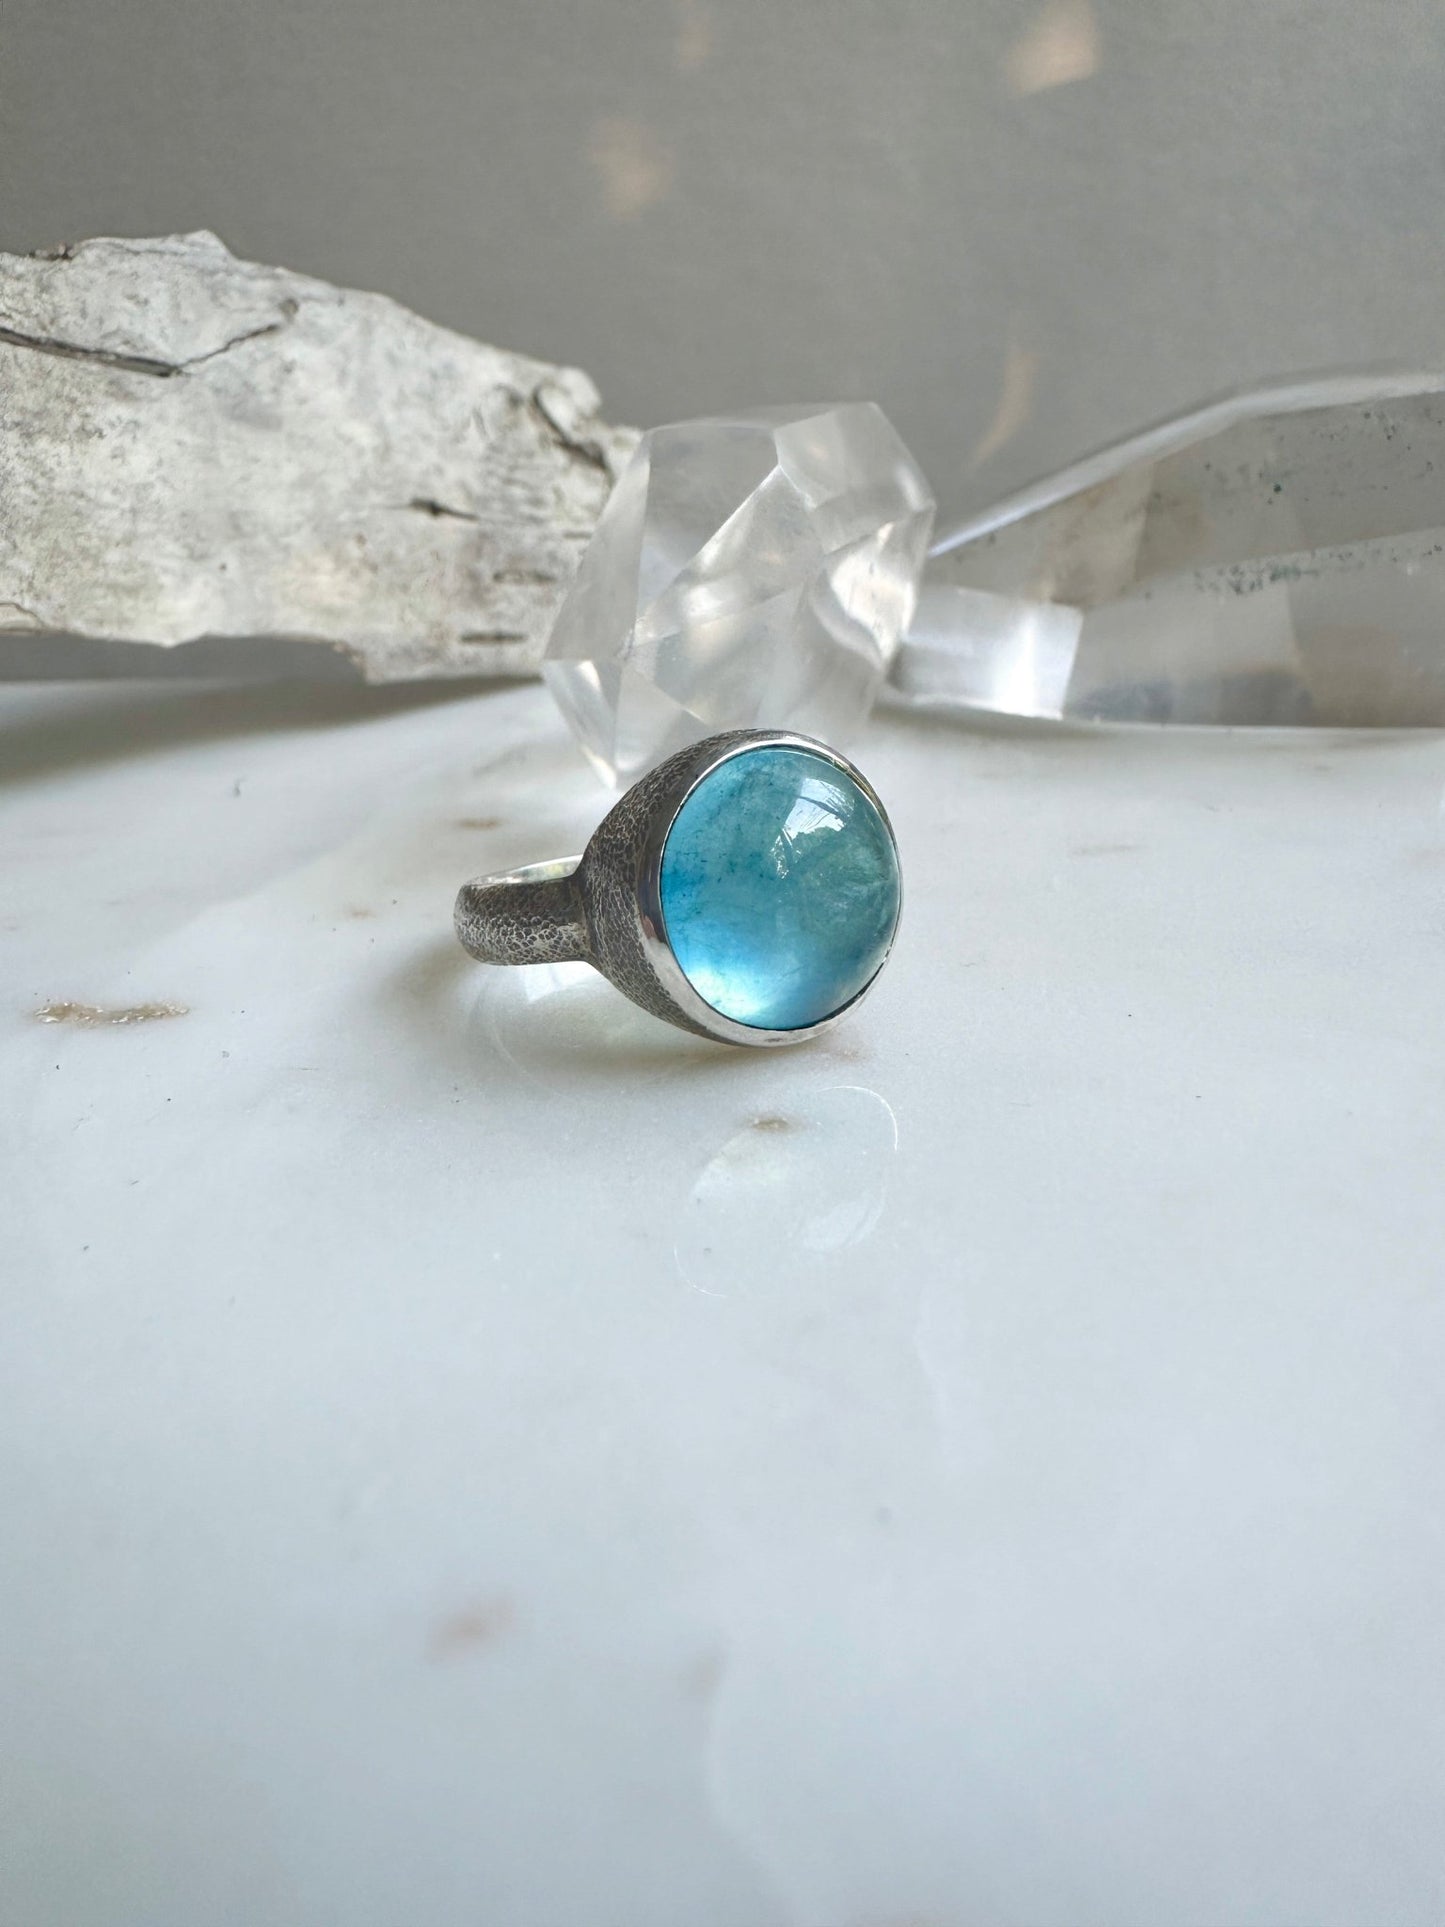 Aquamarine Sterling Silver Rings - Bluecave Jewelry